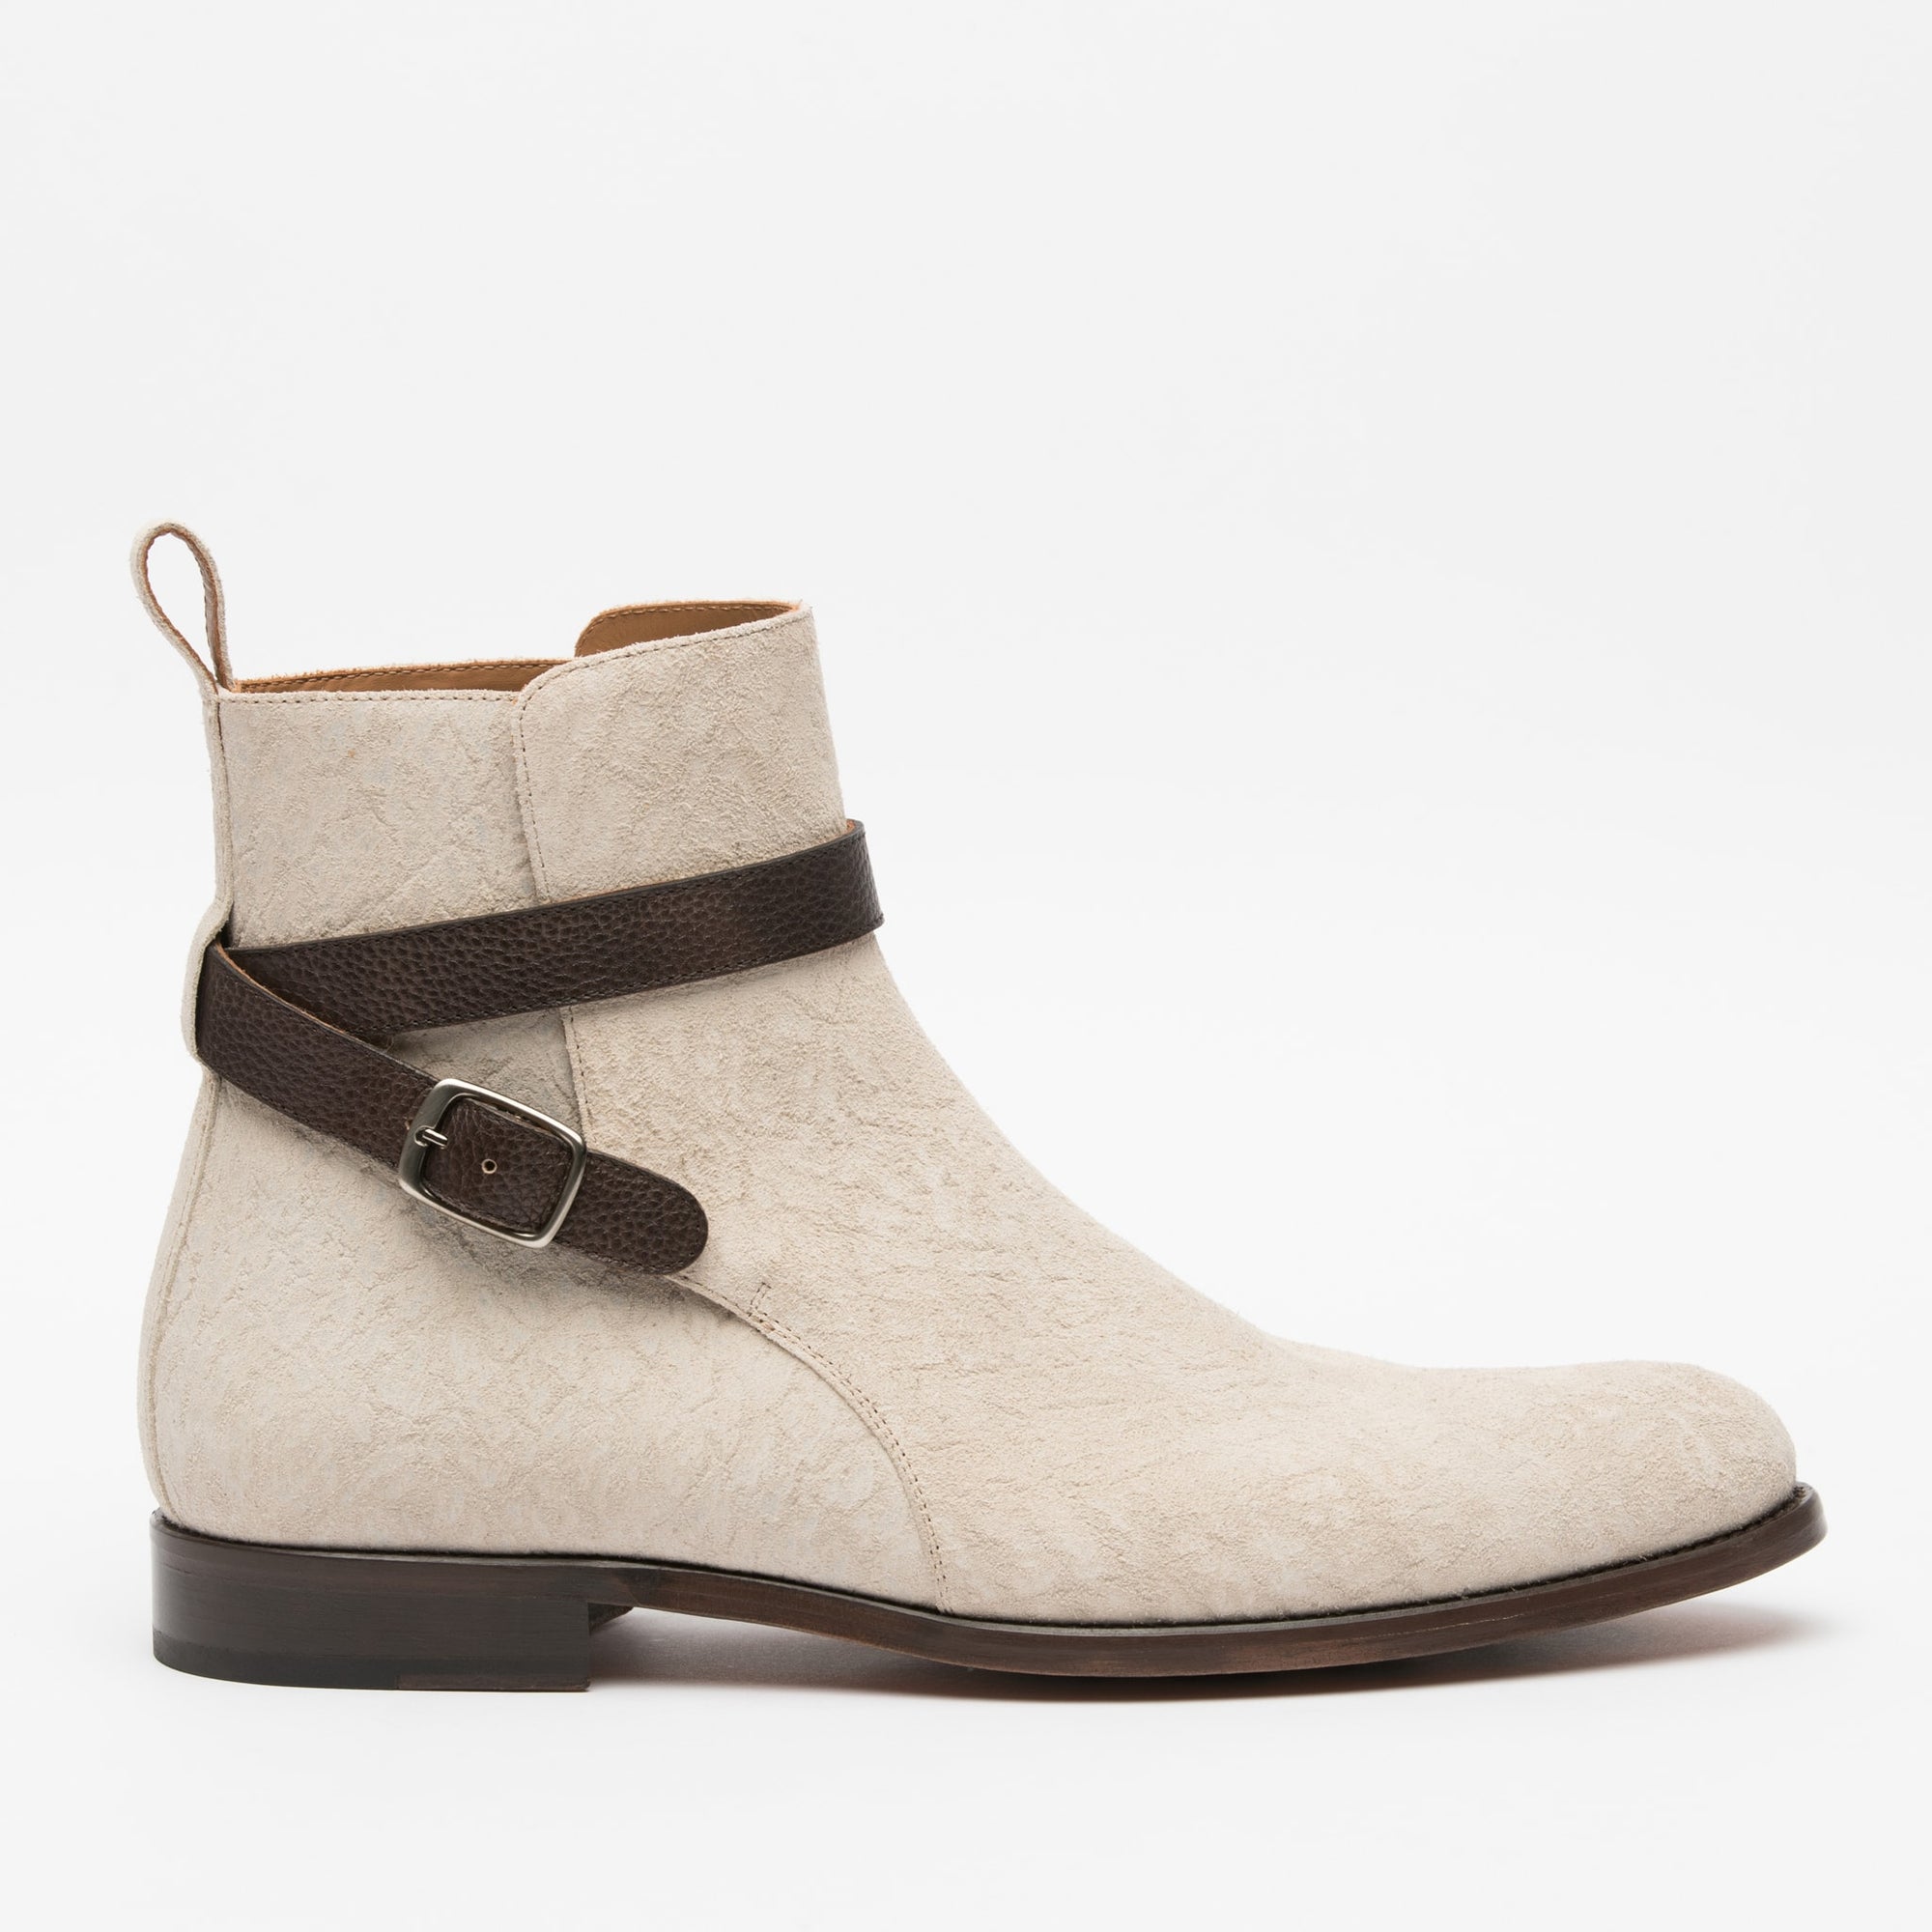 The Dylan Boot in Salt Side